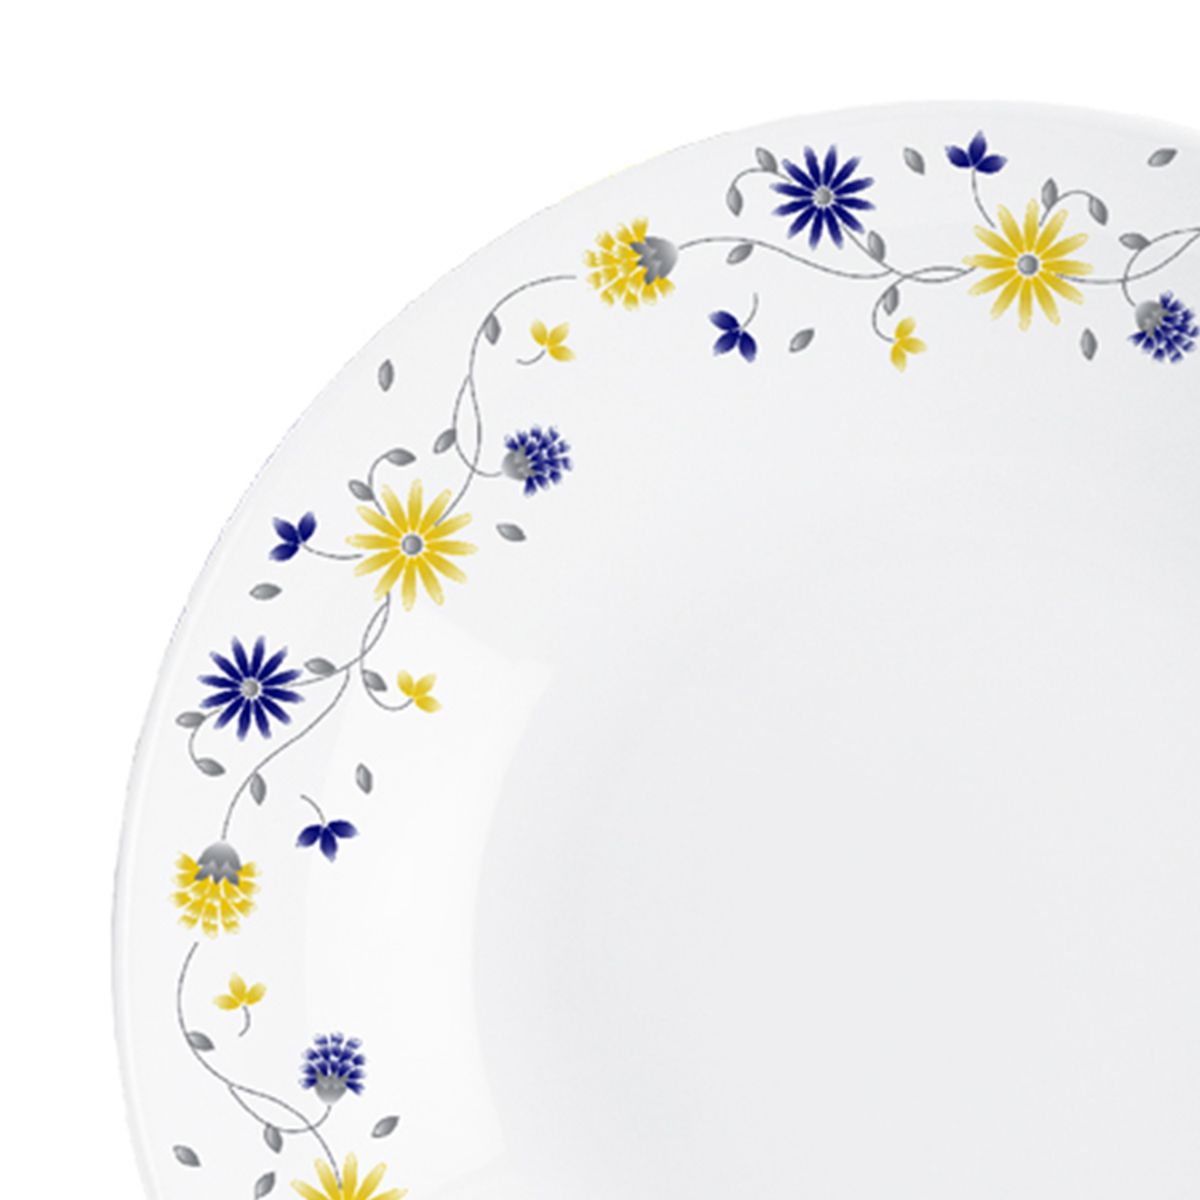 Royale Series Soupy Noodle Gift Set, 2 Pieces Blooming Daisy / 2 Pieces